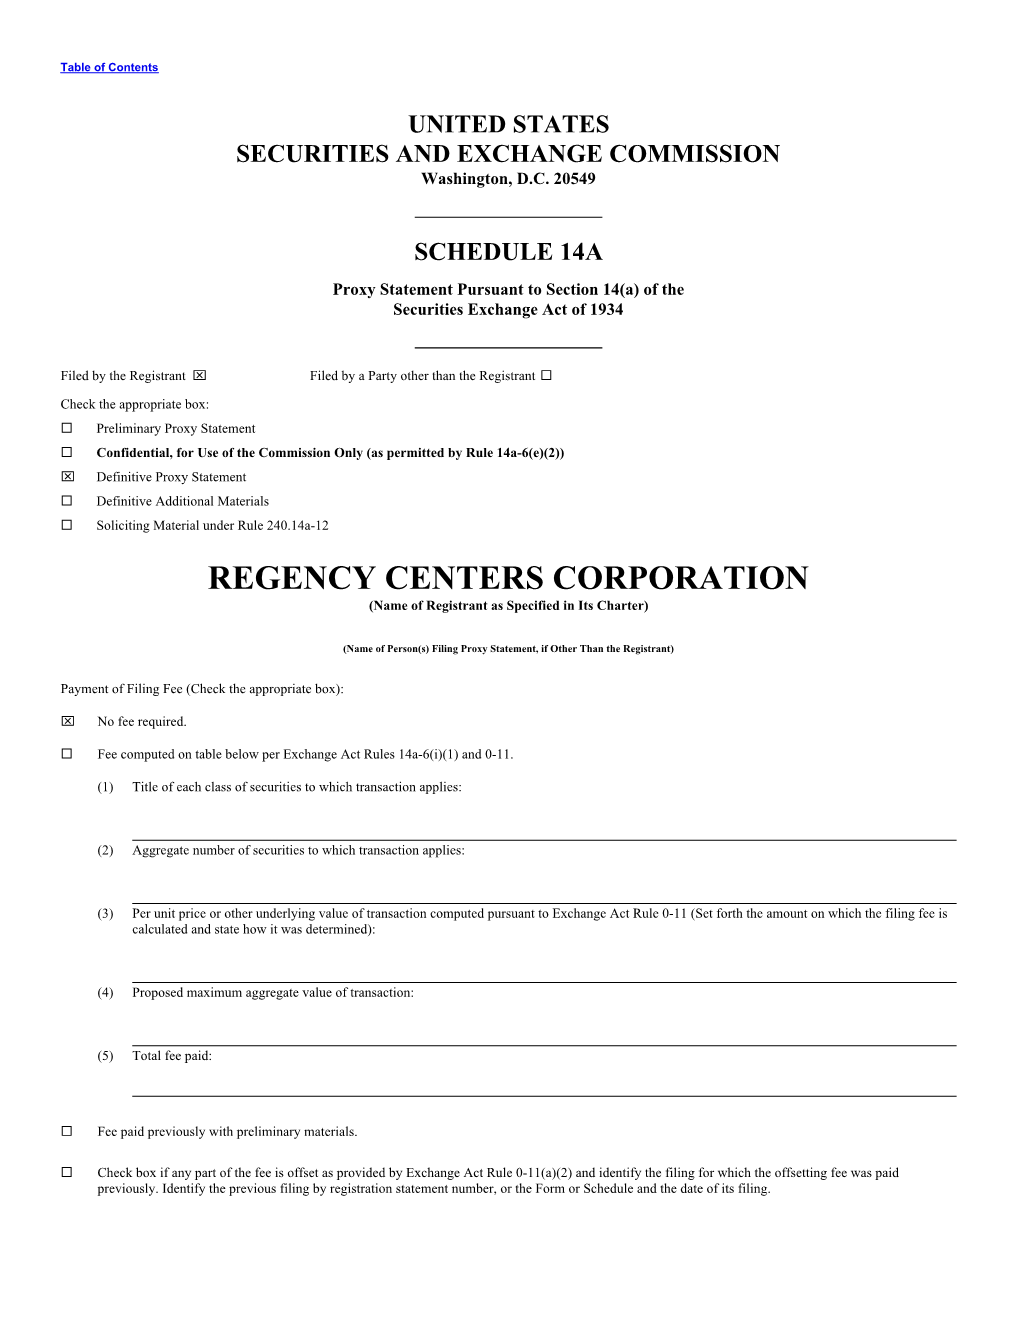 REGENCY CENTERS CORPORATION (Name of Registrant As Specified in Its Charter)